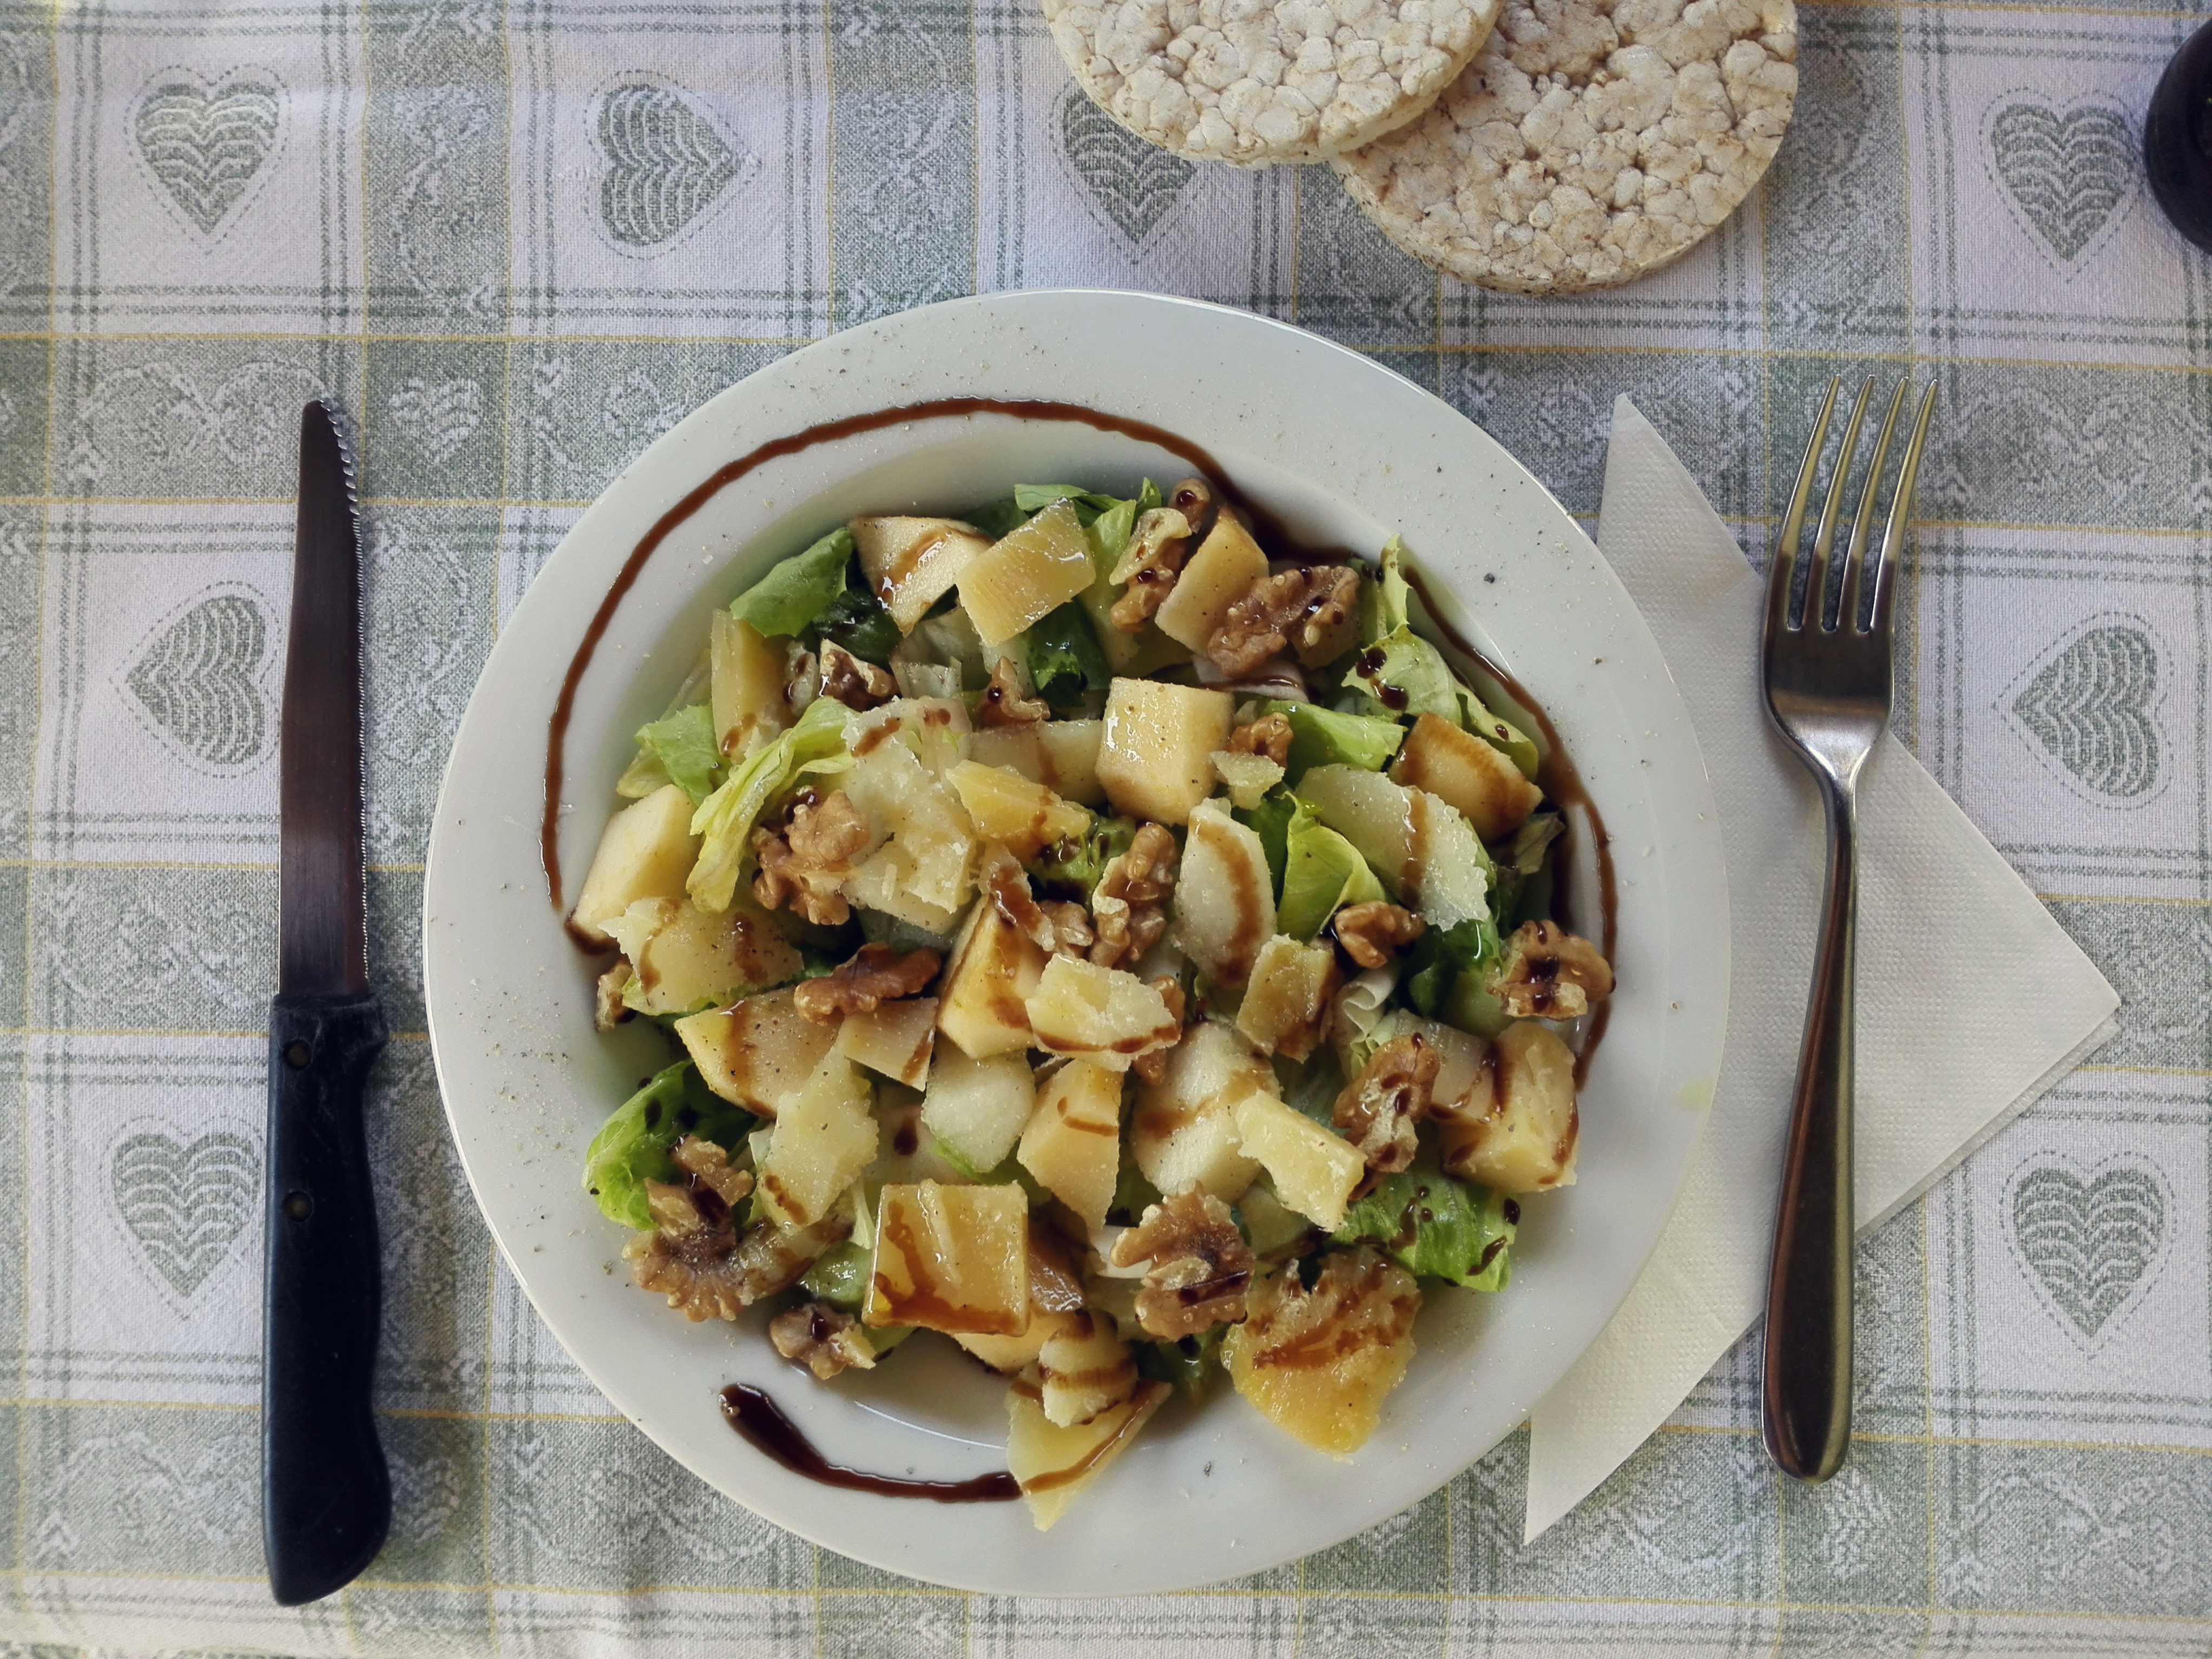 Salad with pears, apples and walnuts with double old cheese